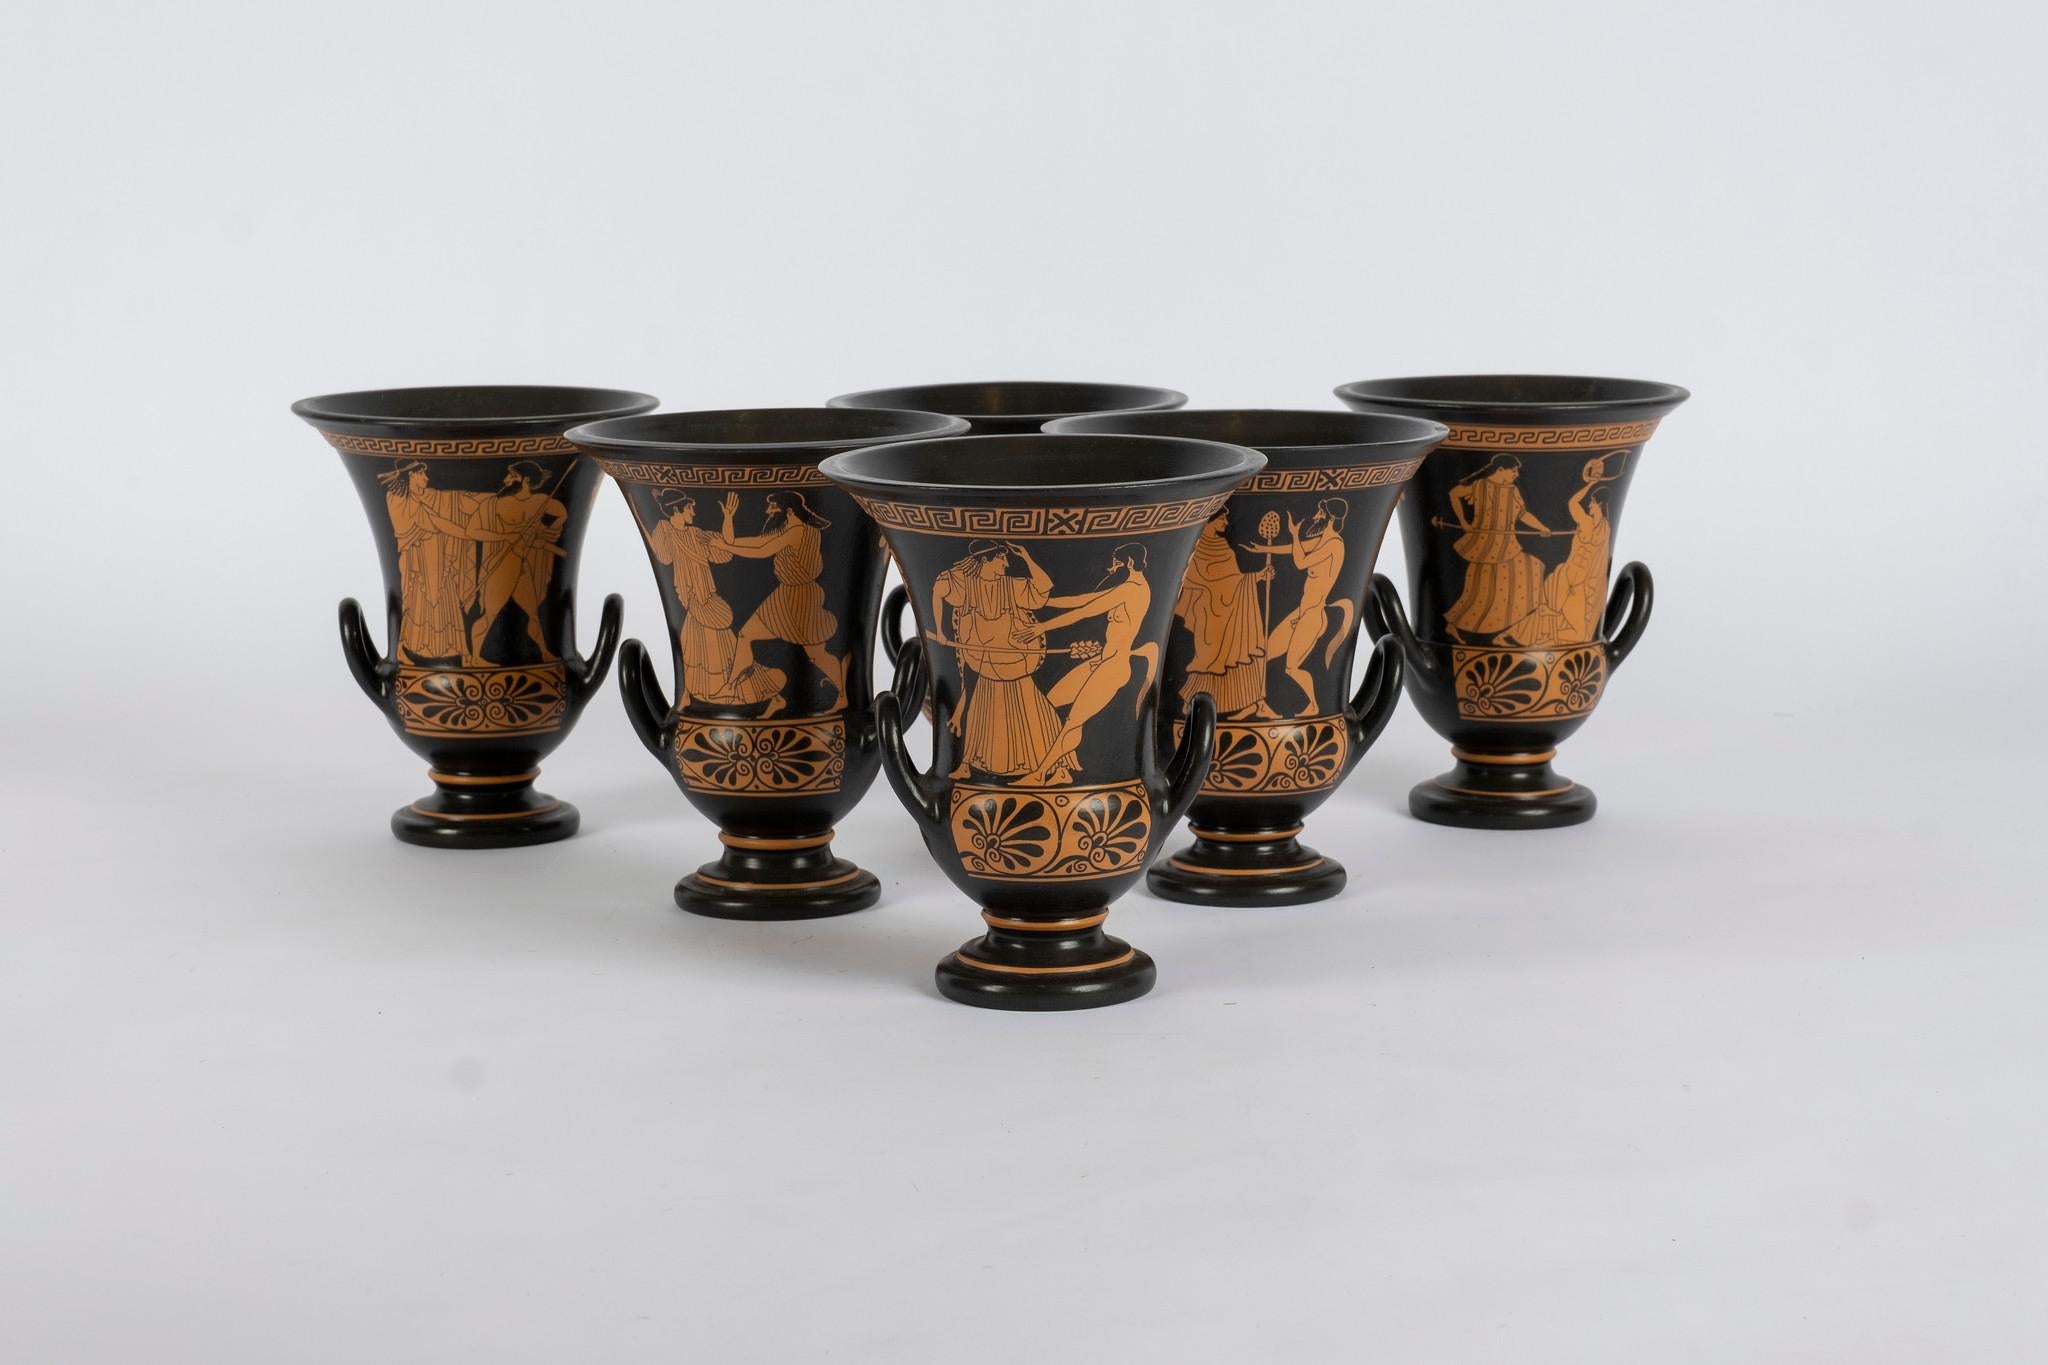 Mid 20th century Attica terra cotta kalyx-kraters featuring gods and goddesses in early Classical Greek scenes. These two handle bowls were made for mixing wine and water and named after the shape of the calyx on a flower. Sold by the pair.